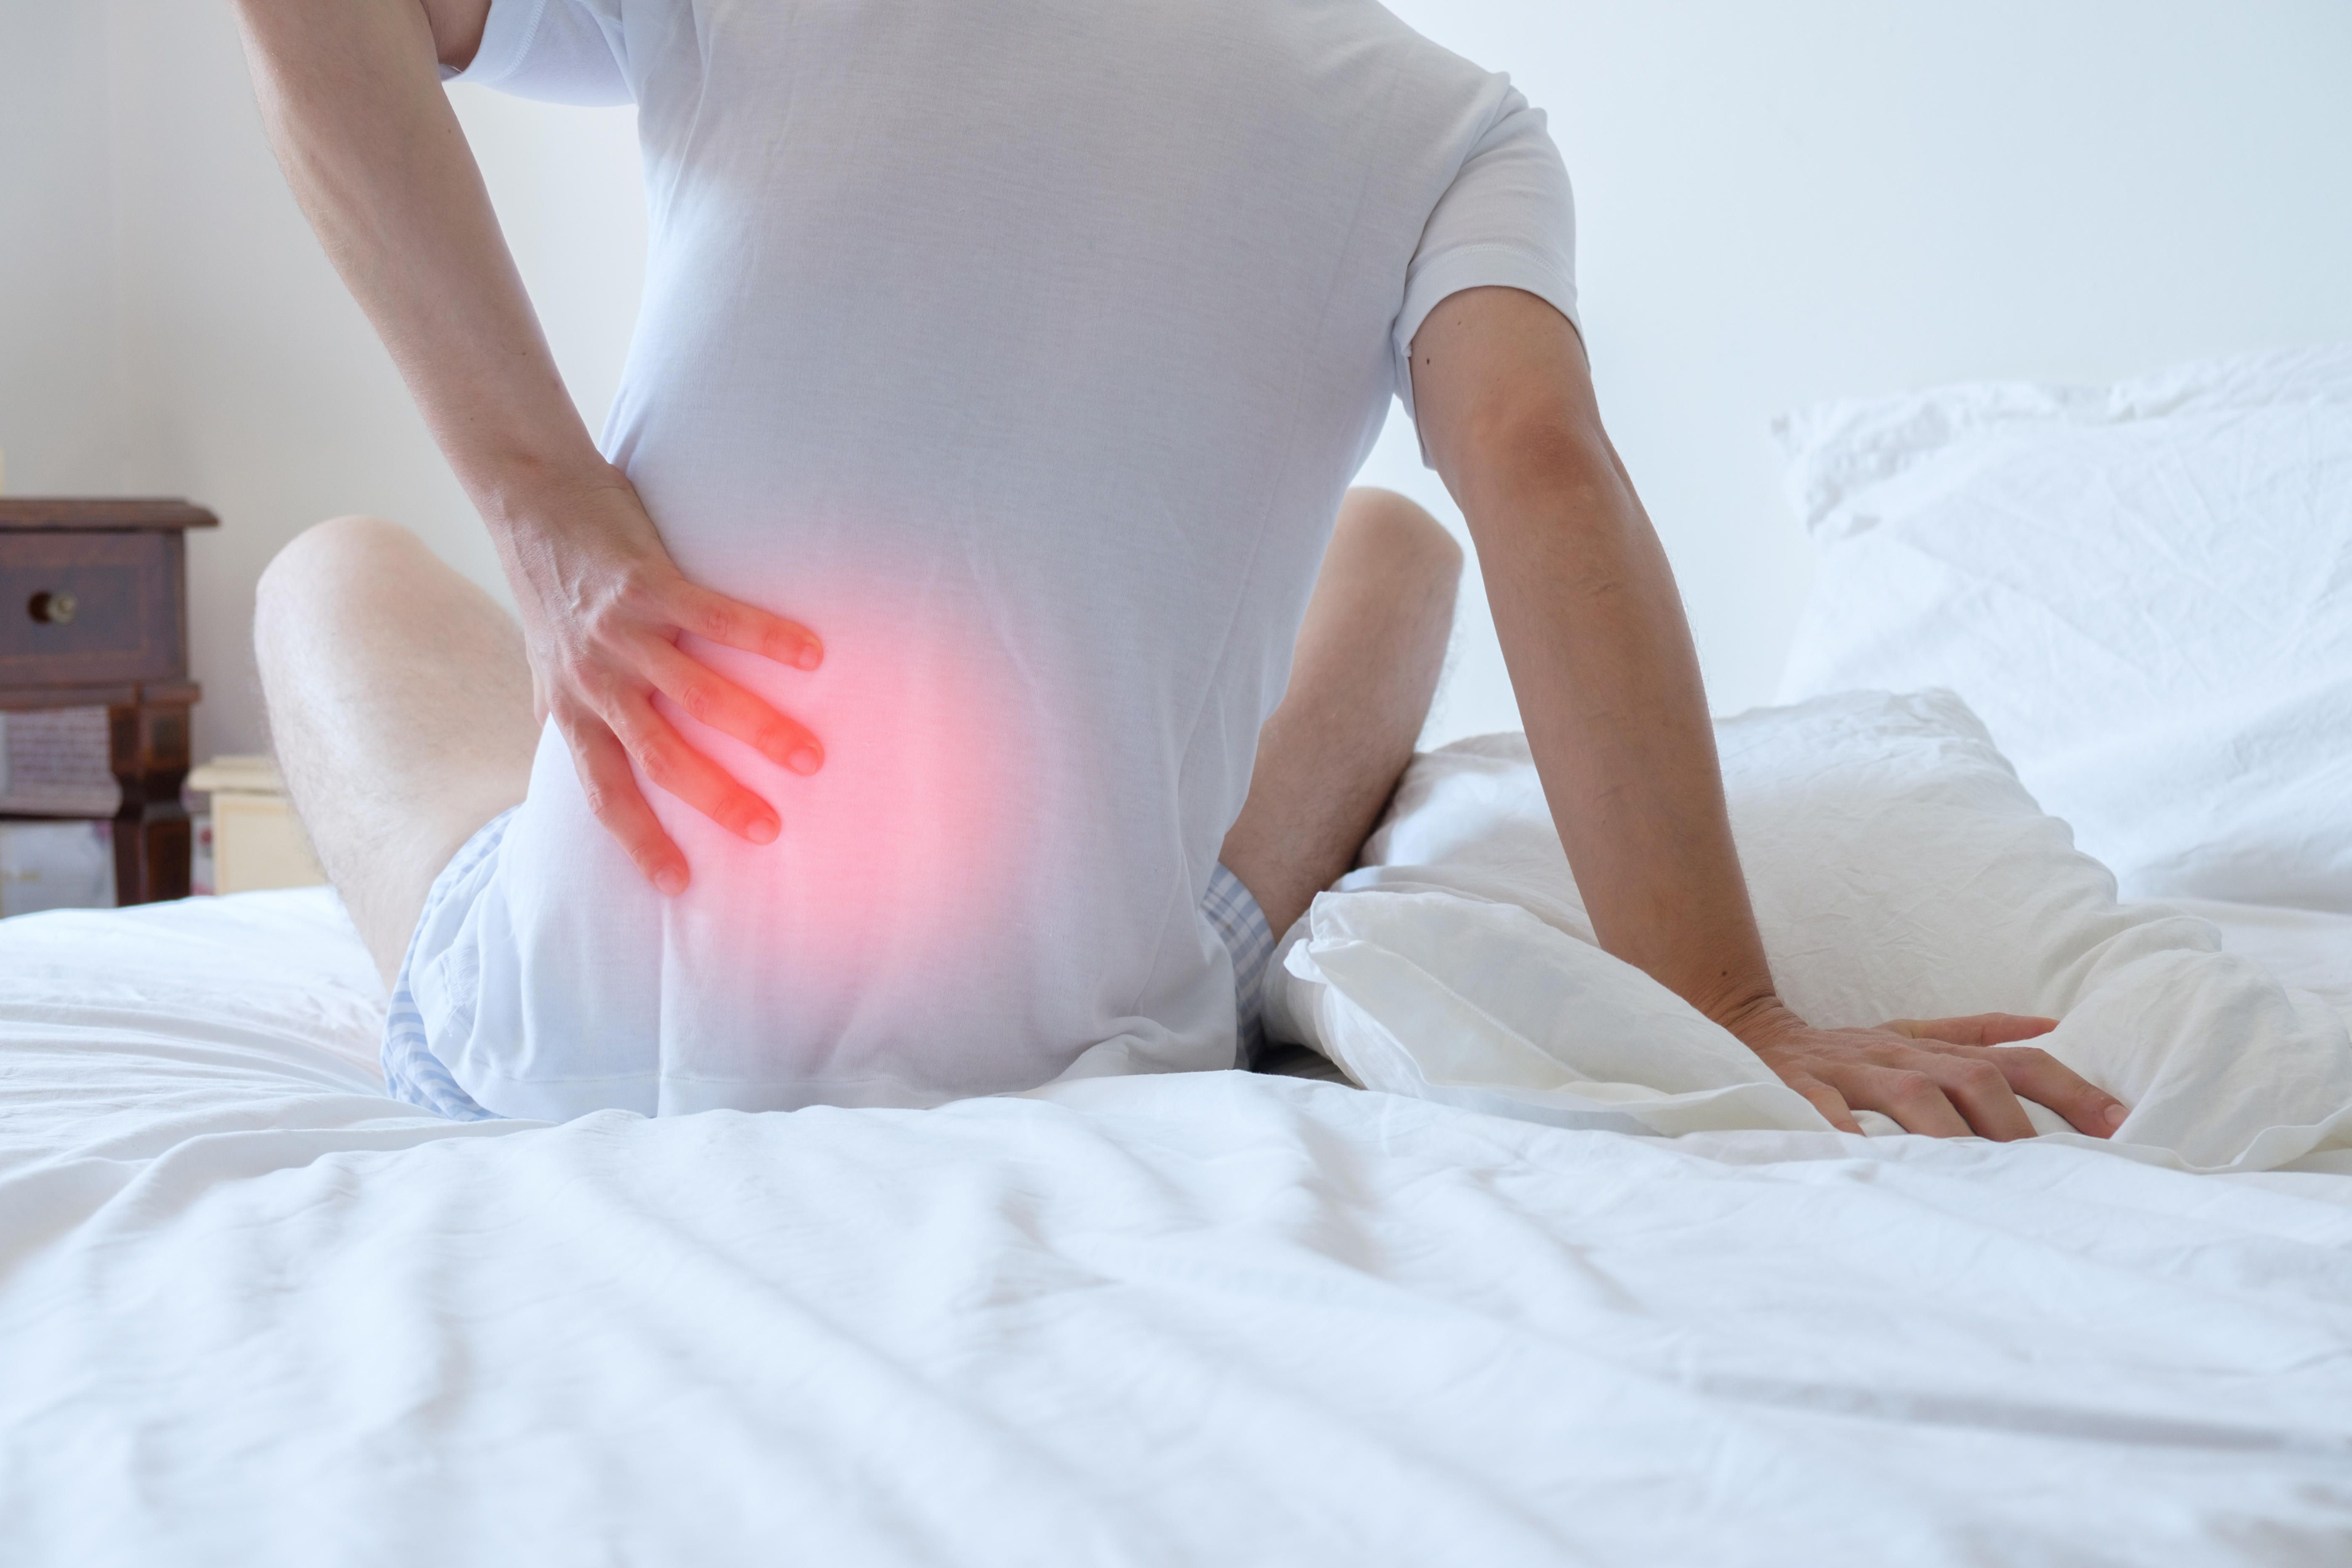 Man waking up with back pain from mattress